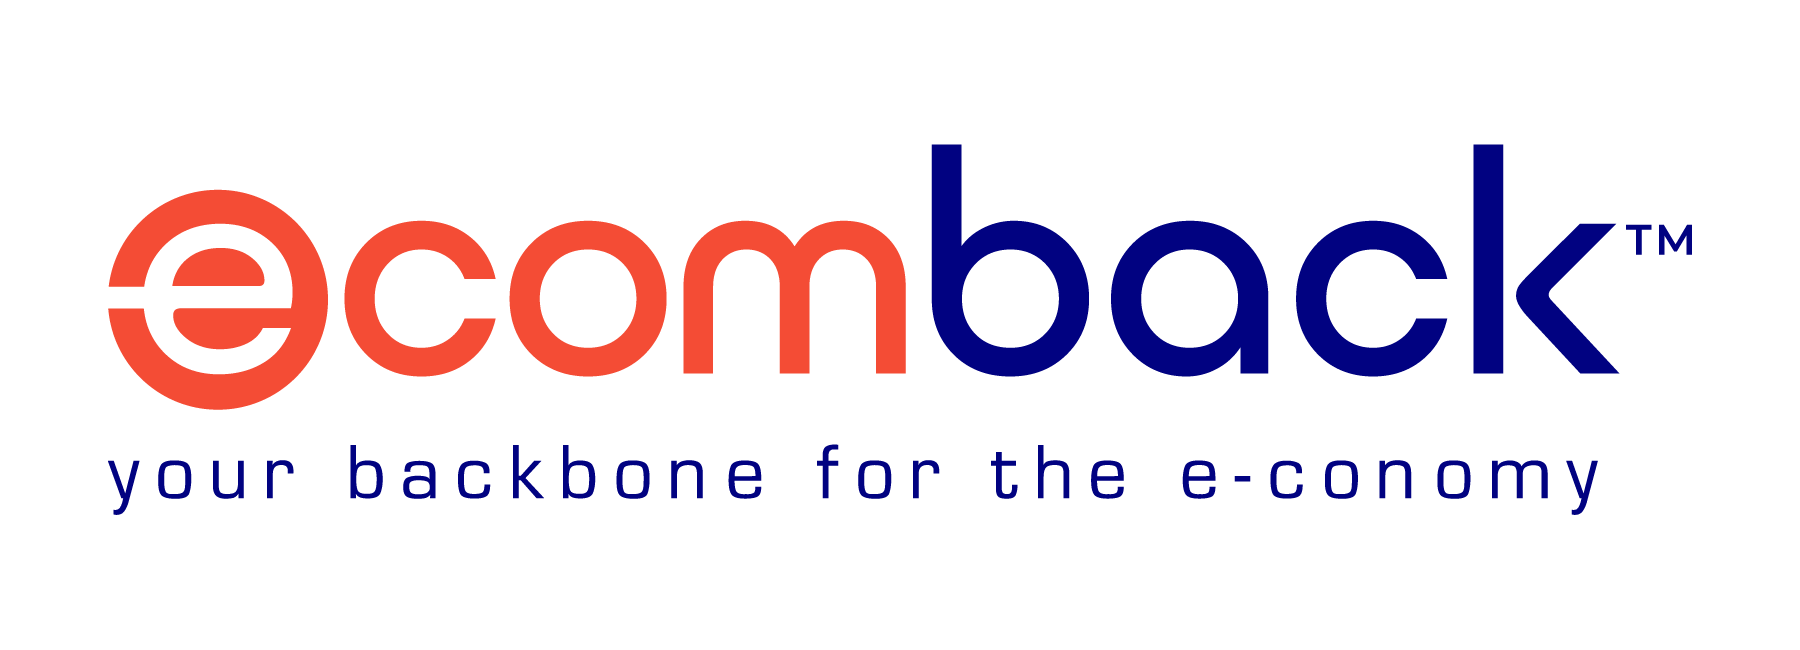 EcomBack Provides Web Development Services for Small Online Businesses